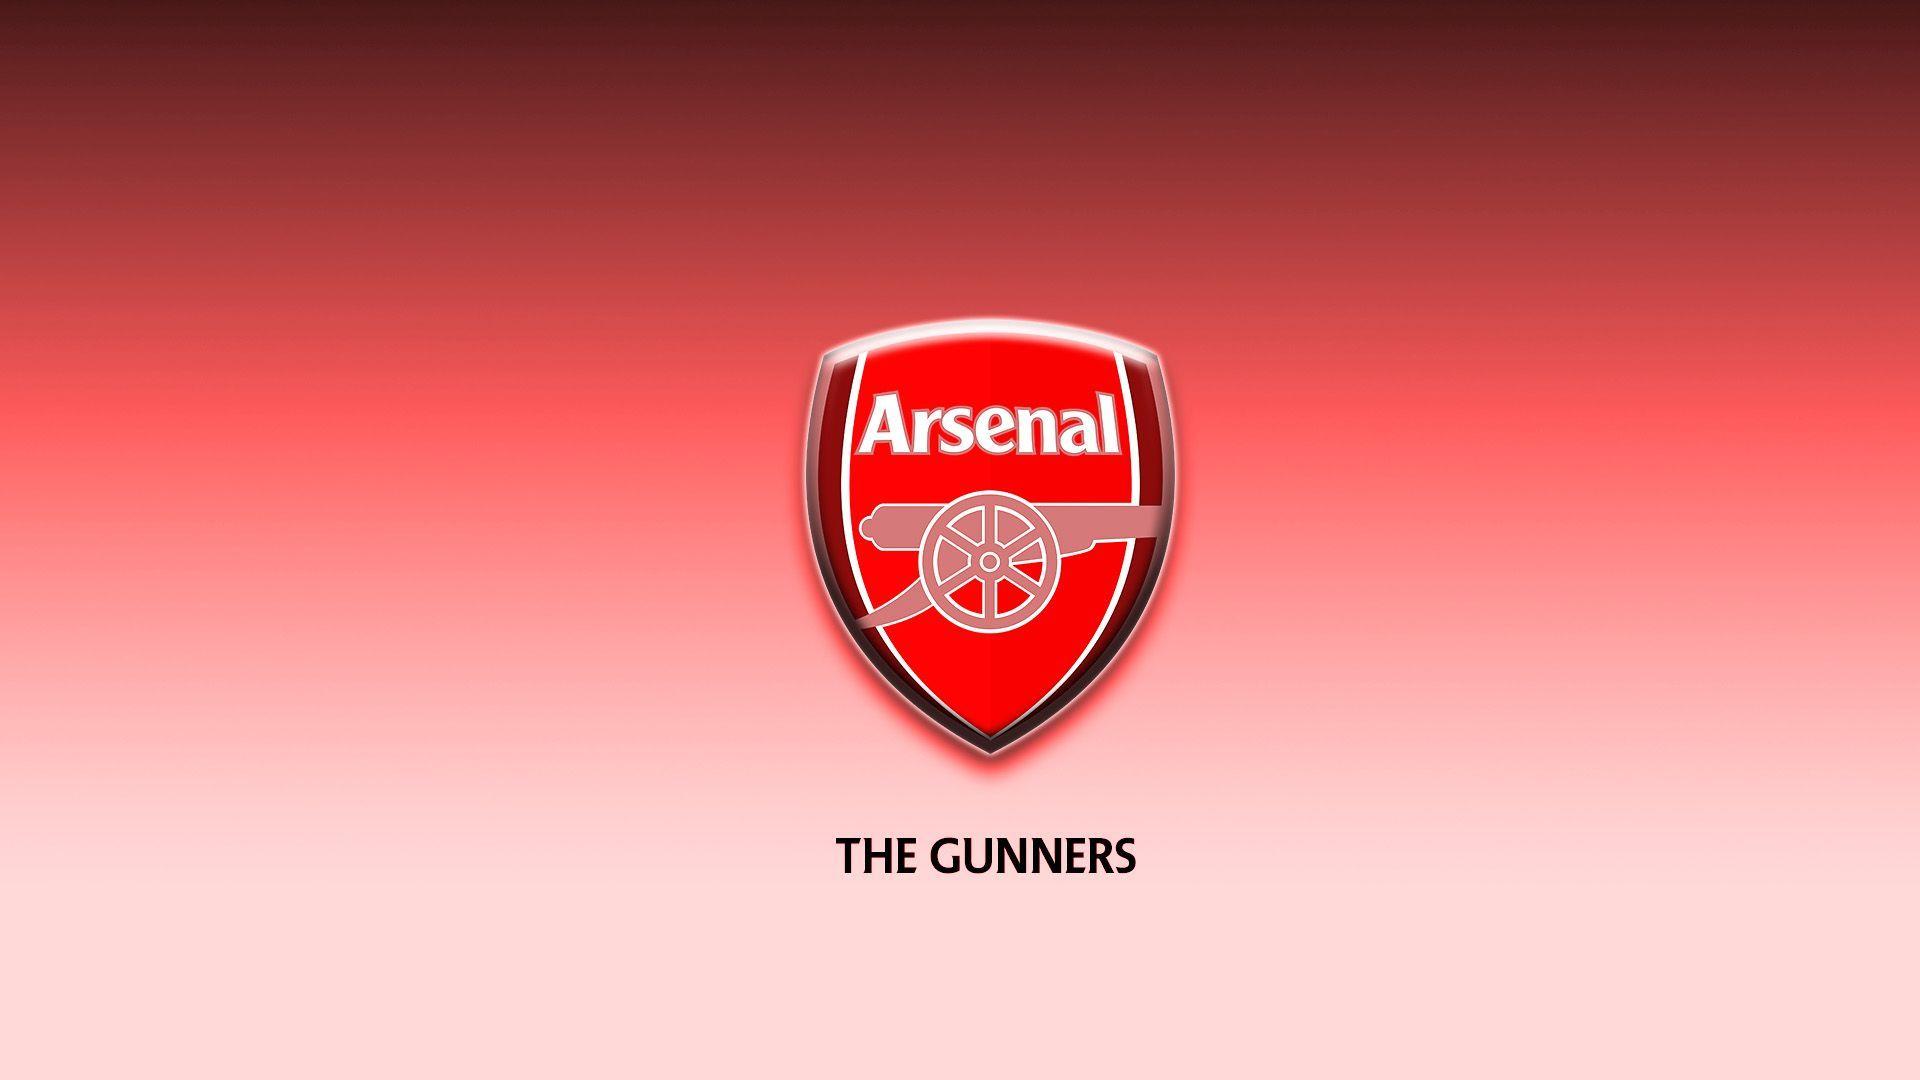 Arsenal FC Wallpaper and Windows 10 Theme. All for Windows 10 Free